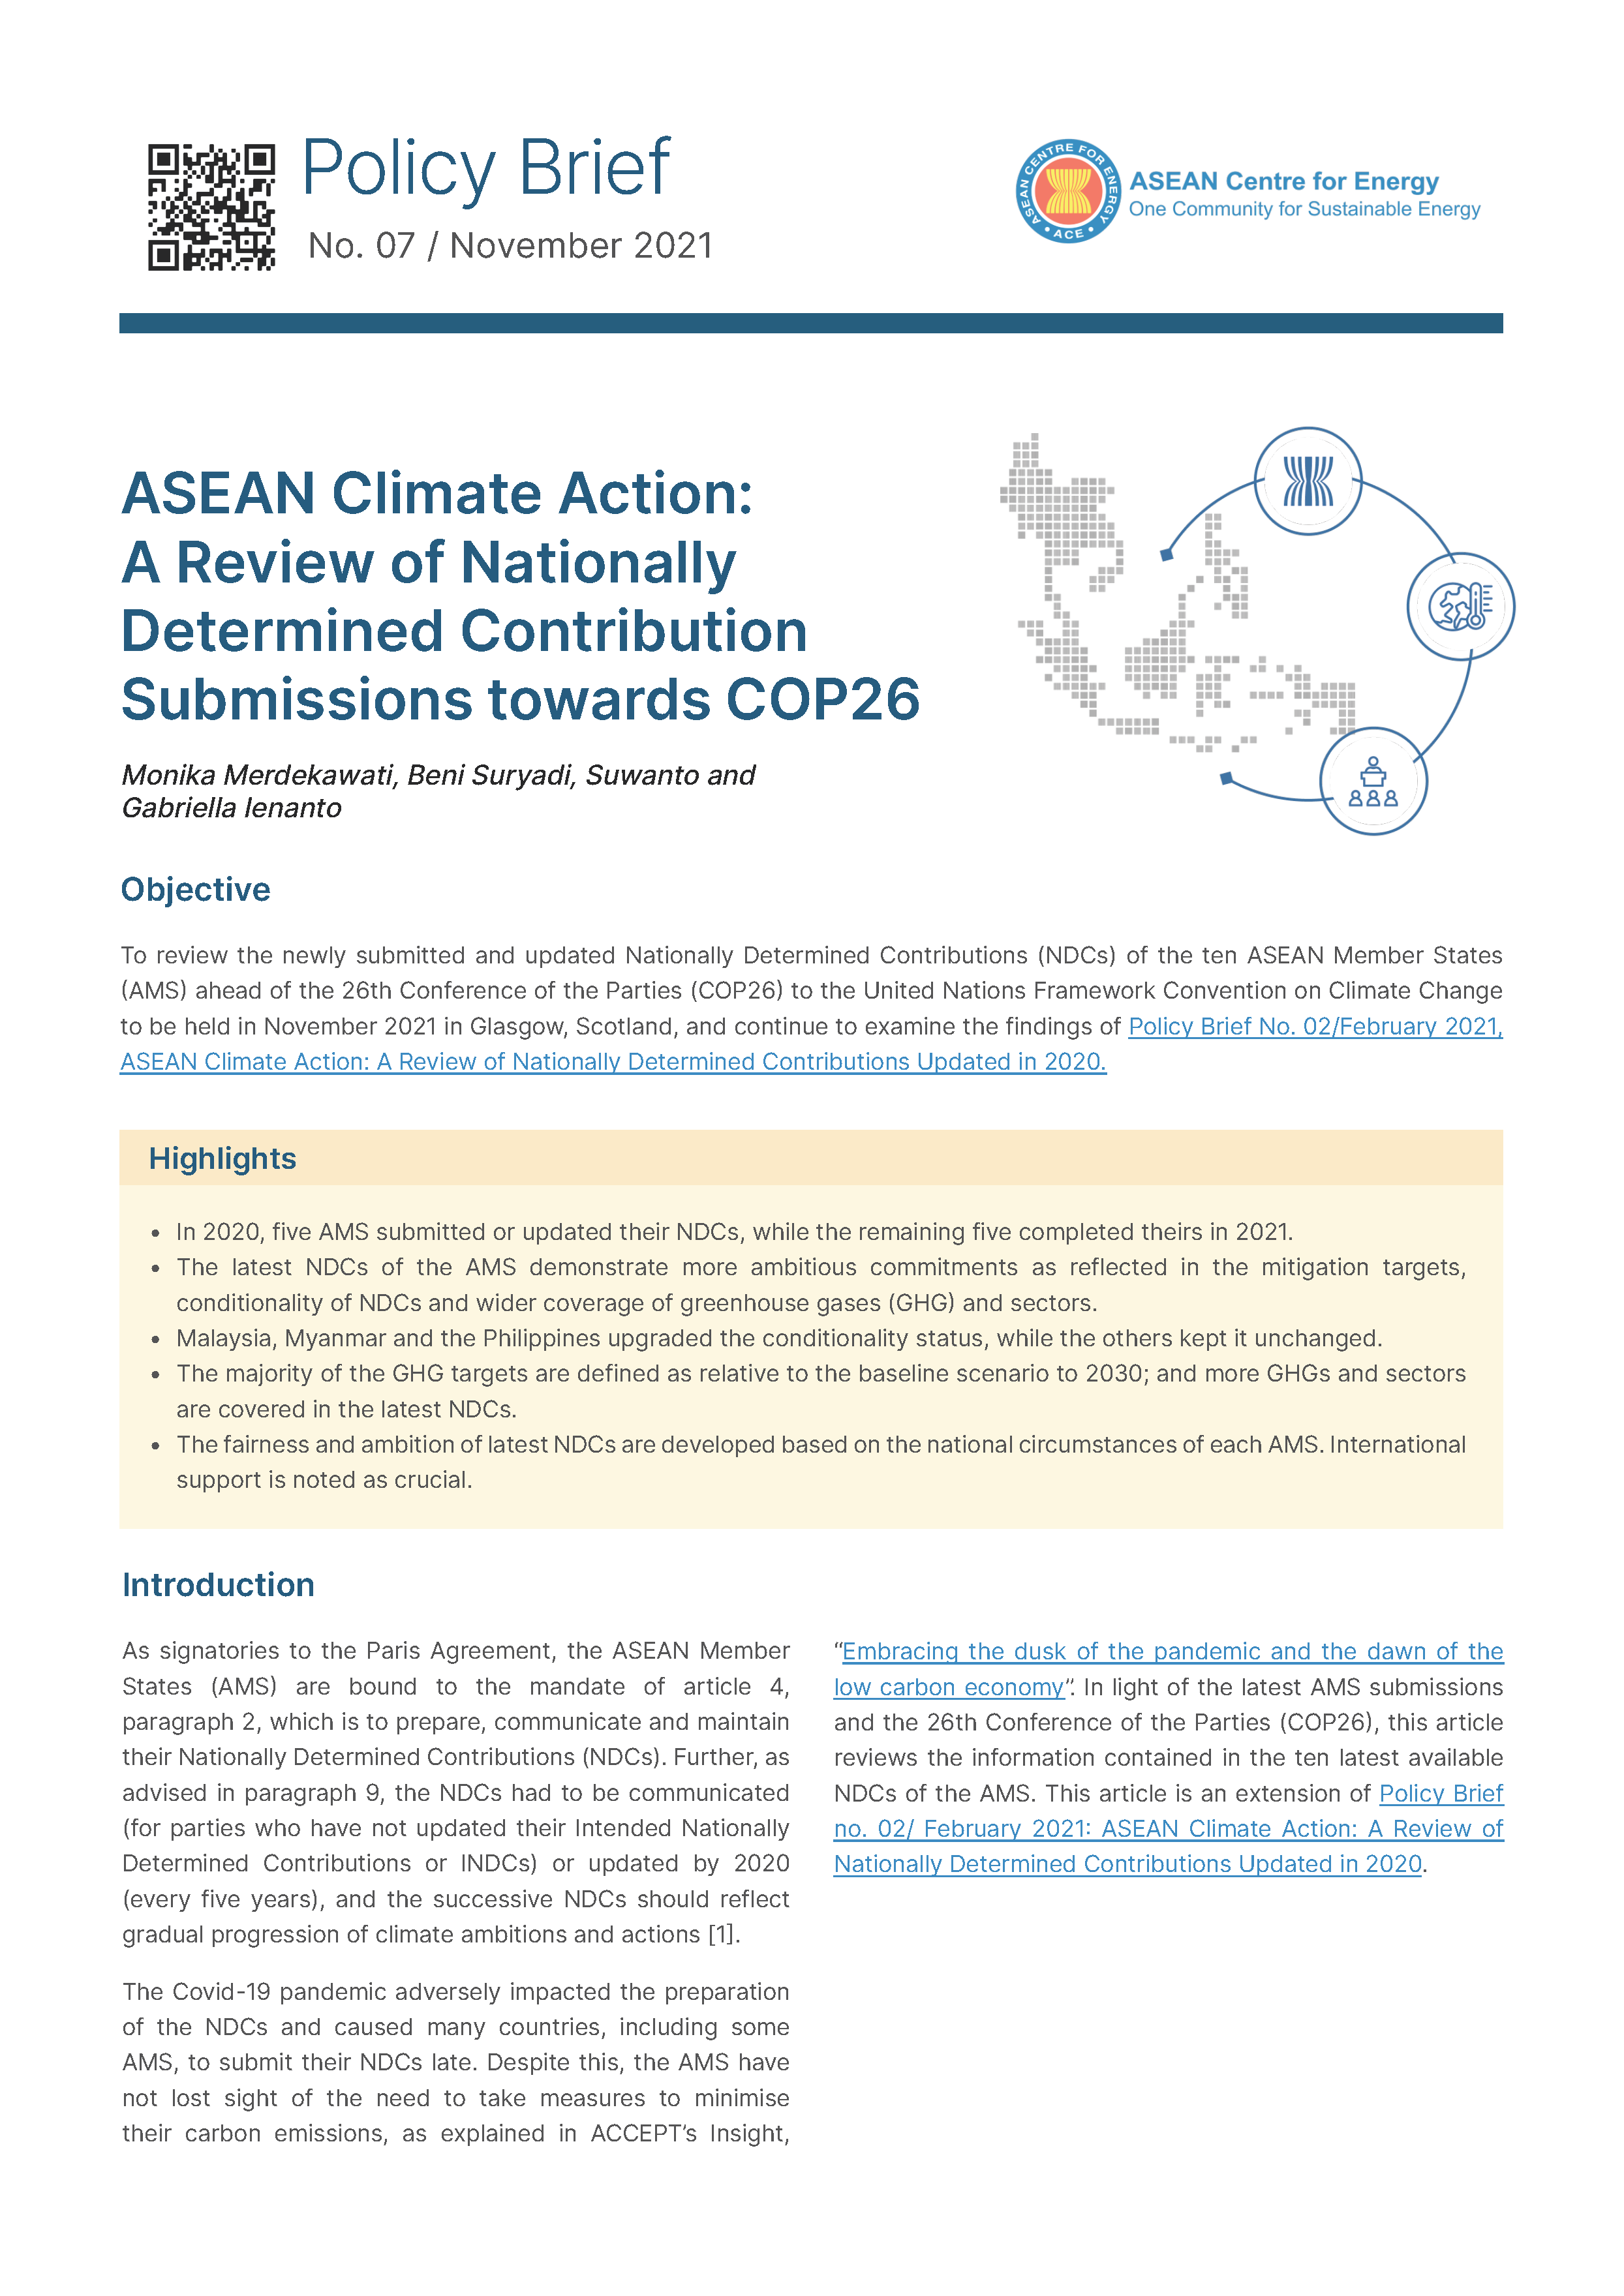 PB-07-2021-ASEAN-Climate-Action-A-Review-of-Nationally-Determined-Contribution-Submissions-towards-COP26_Page_1